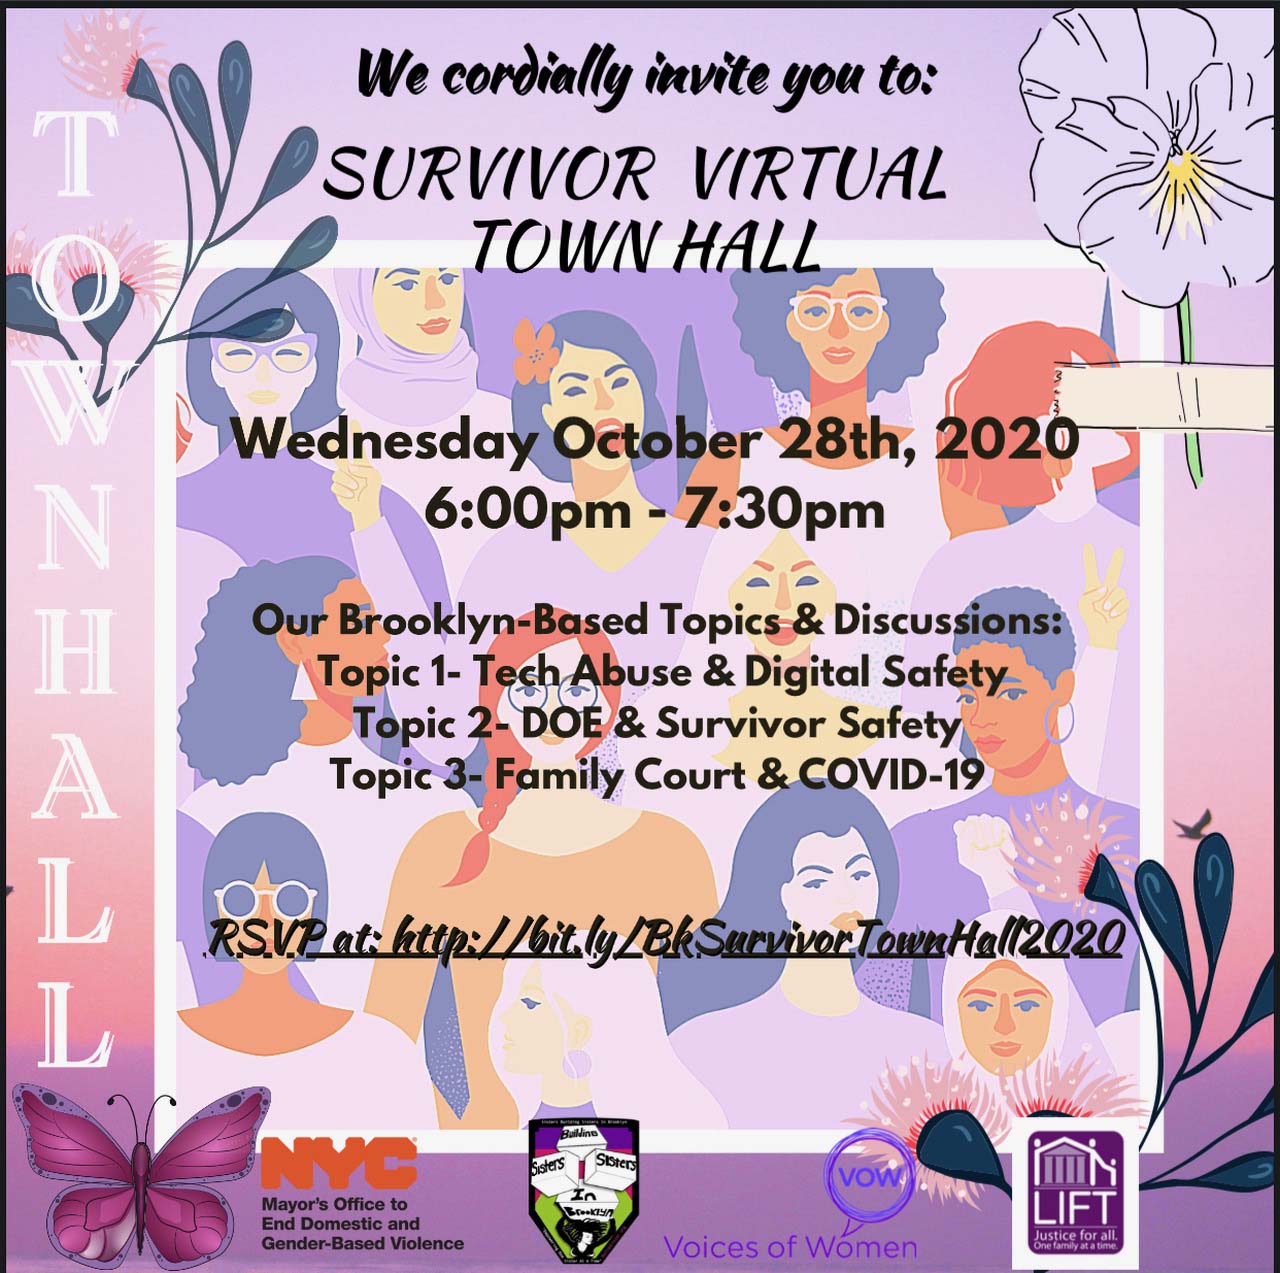 Survivor Virtual Town Hall - Wednesday October 28th, 2020 6:00 pm - 7:20 pm. Our Brooklyn-Based Topics & Discussion about Tech about and Dgital Safety, DOE and Survivor Safety, and Family Couty and Survivor Saftey RSVP at http://bit.ly/BkSurvivorTownHall2020